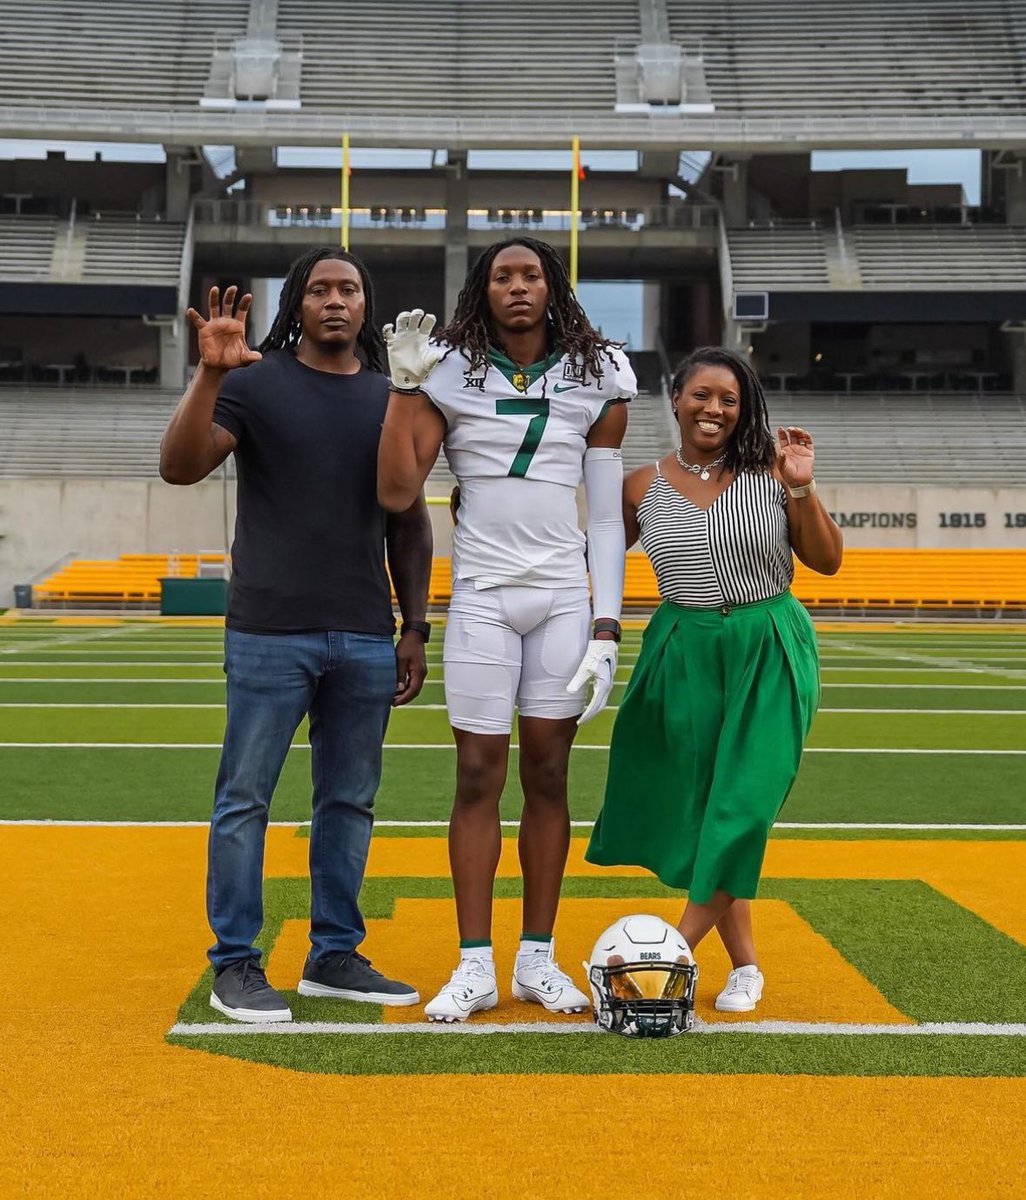 4⭐️ cornerback Kade Phillips on his #Baylor official visit this past weekend. “The coaches just kept it real with me, told me they have a plan for me, and they really want me here.” #SicEm 📸:thekadephillips/IG